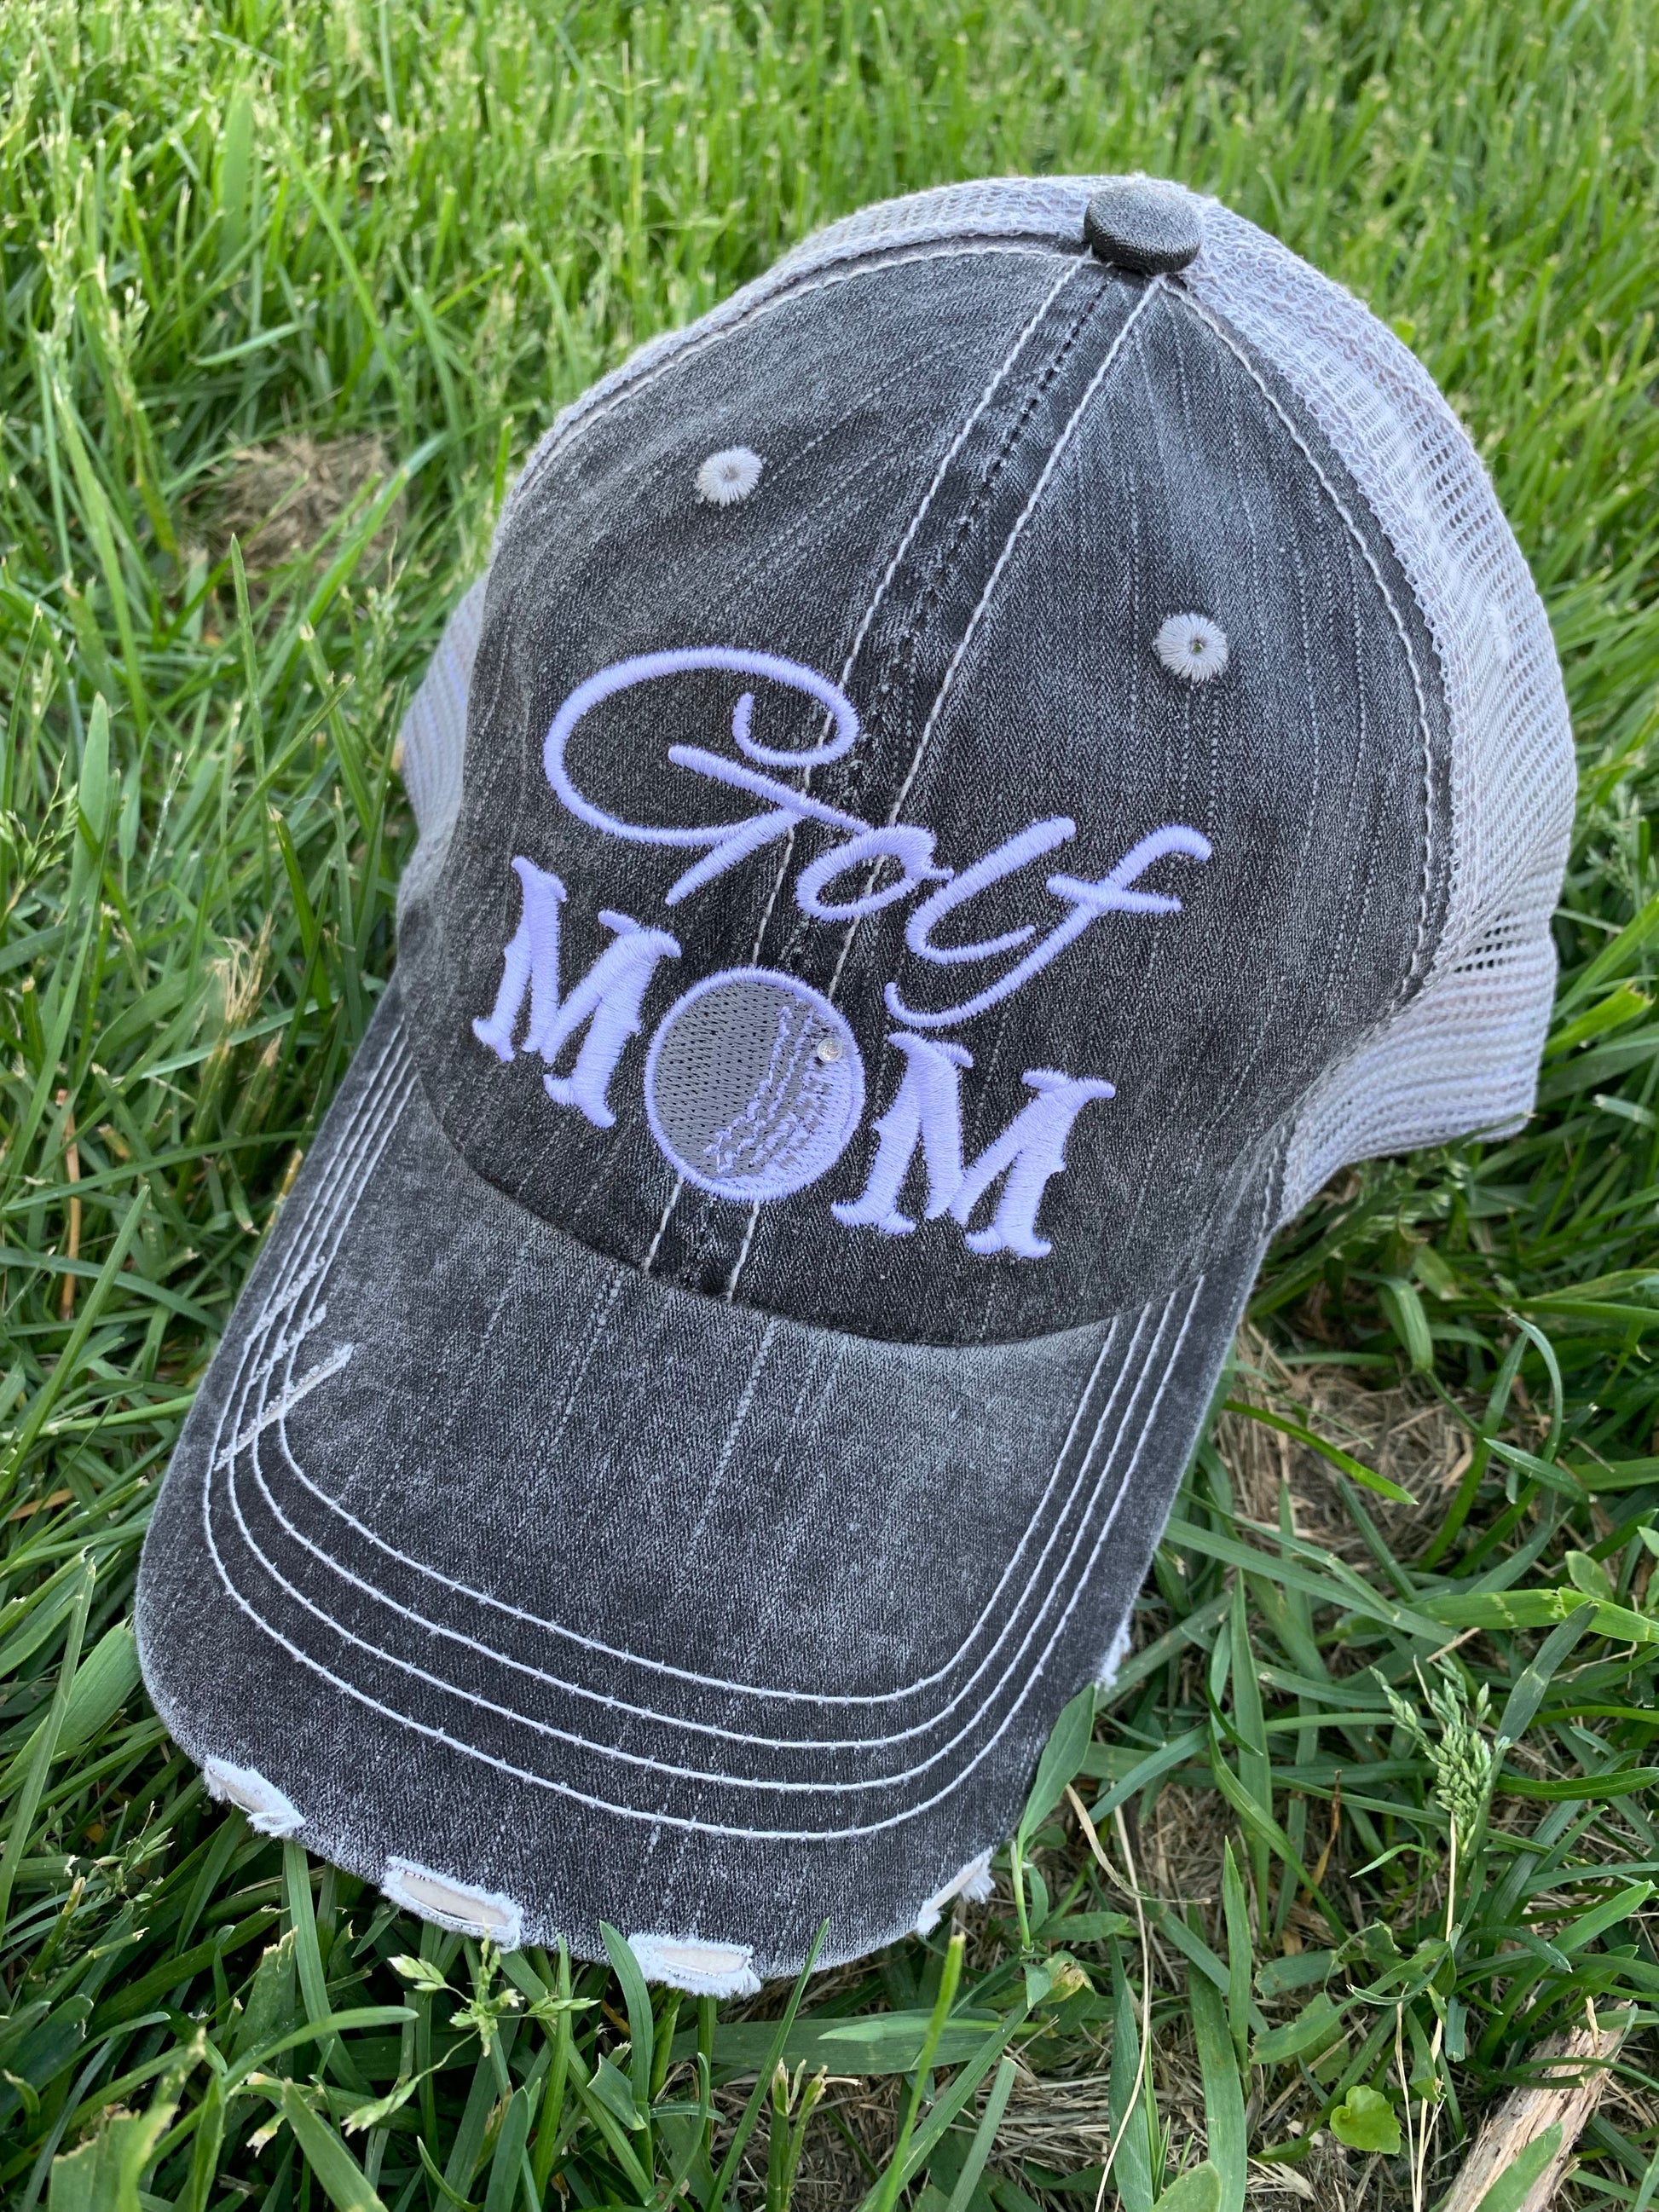 Golf hats! Golf mom | Golf hair dont care | Embroidered distressed trucker caps CUSTOMIZE-name-numbers-BLING! - Stacy's Pink Martini Boutique